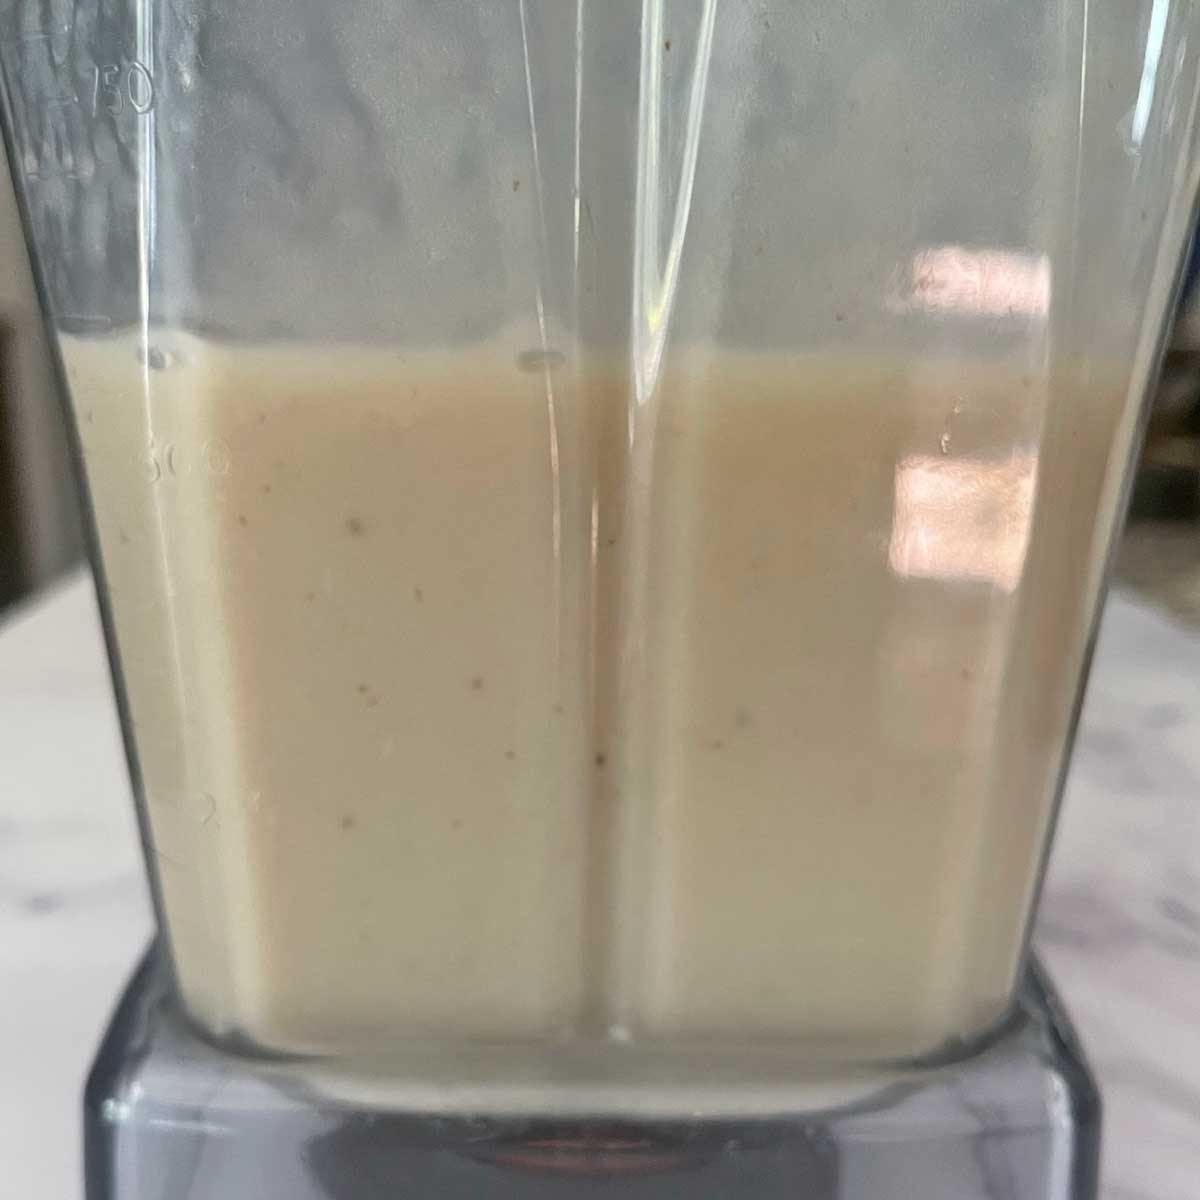 Blended mix for banana ice cream in a jar.